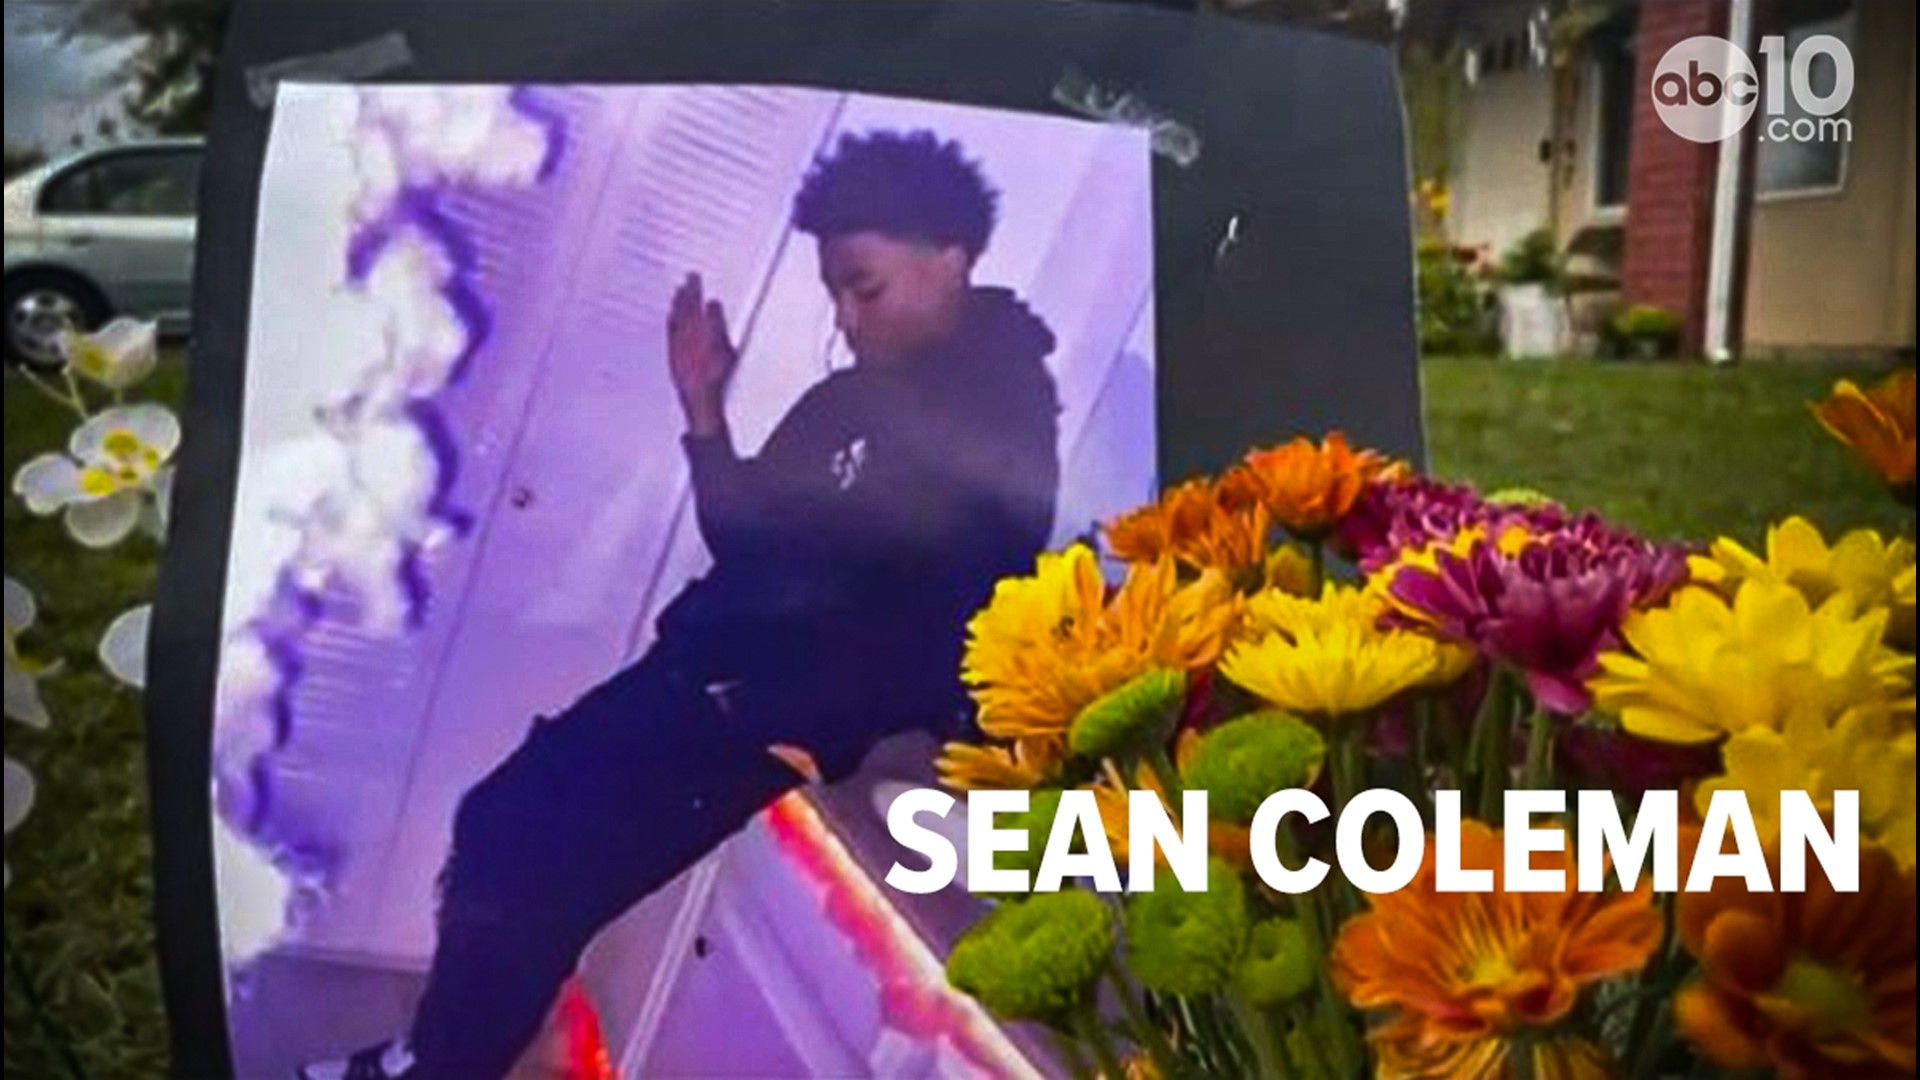 Deputies said 15-year-old Sean Coleman was shot and killed Friday night. Now, a picture is the only thing that's left at the corner of Lenore Way and Shell Street.